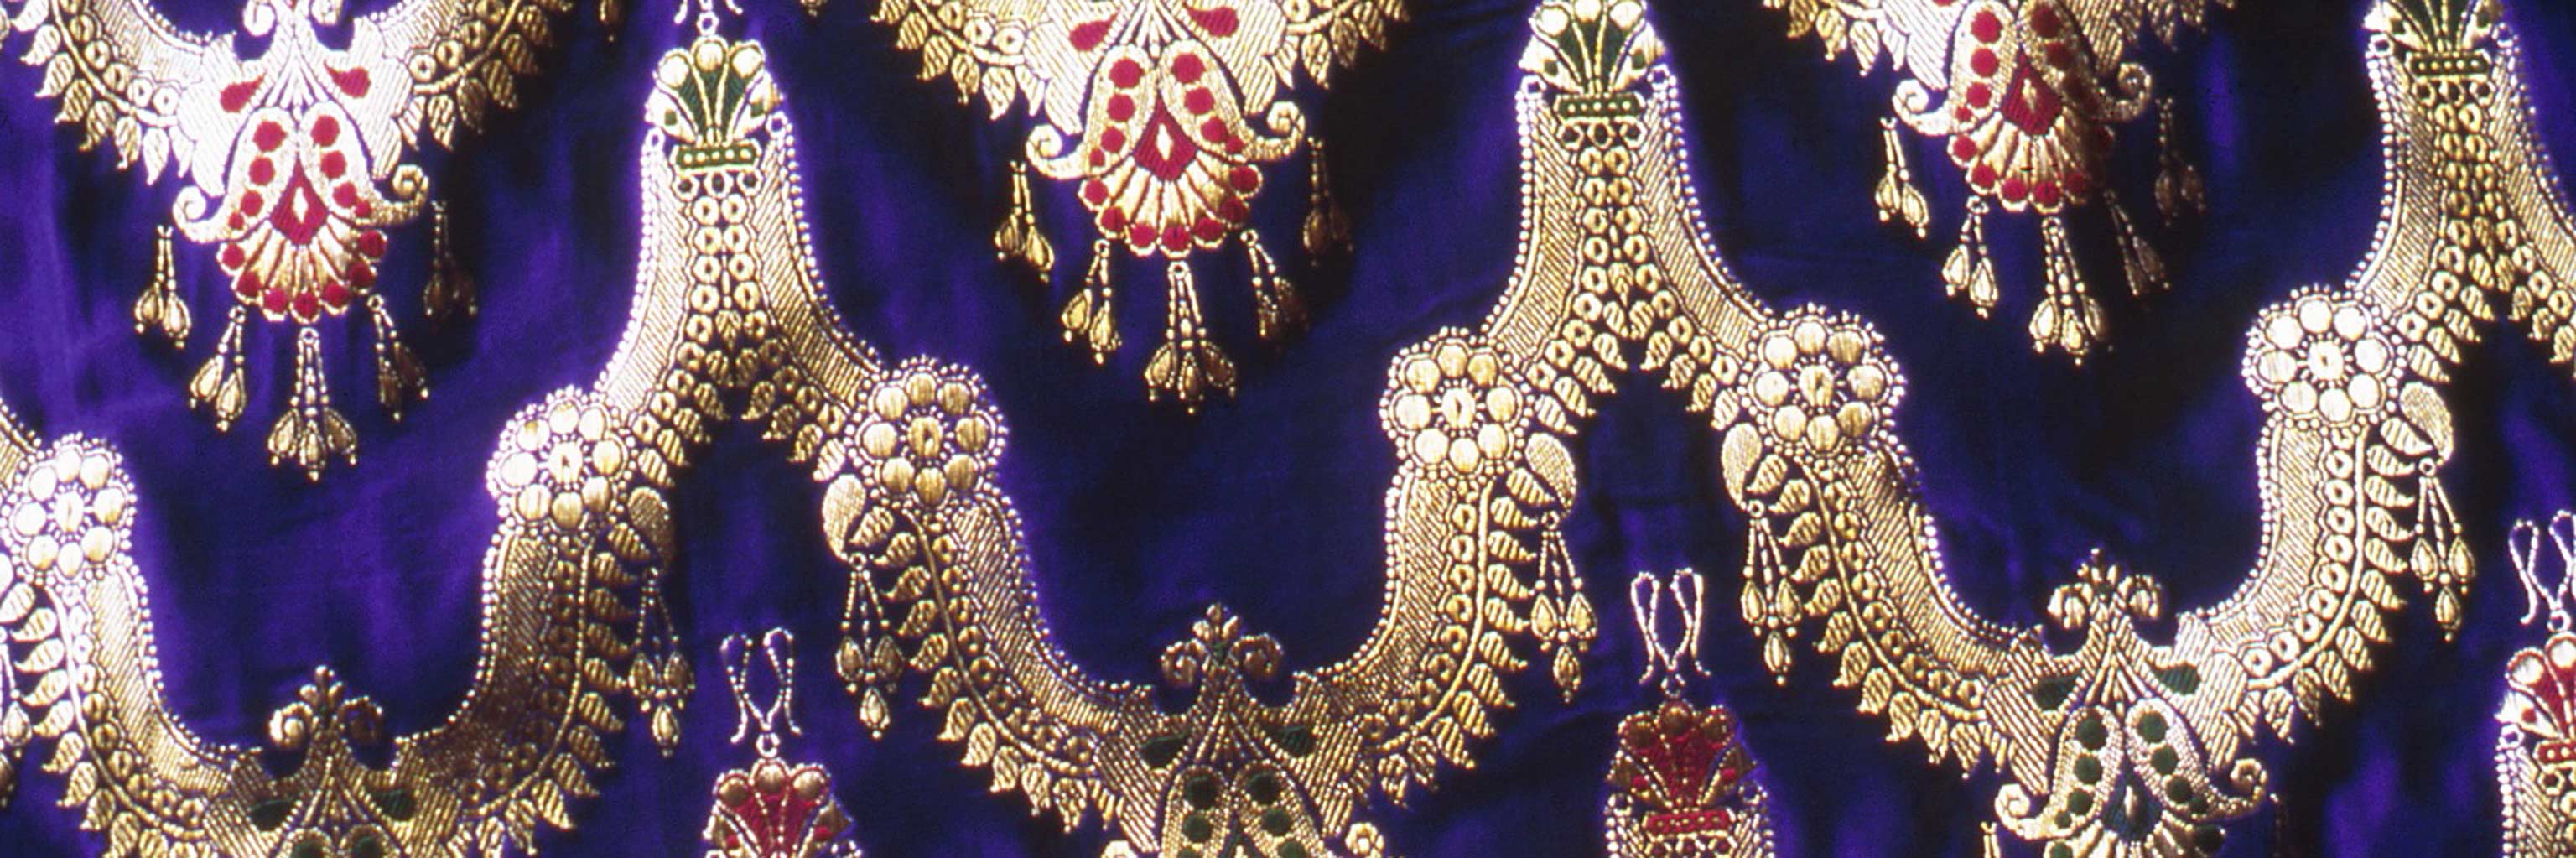 Close-up of intricate fabric embroidery. 